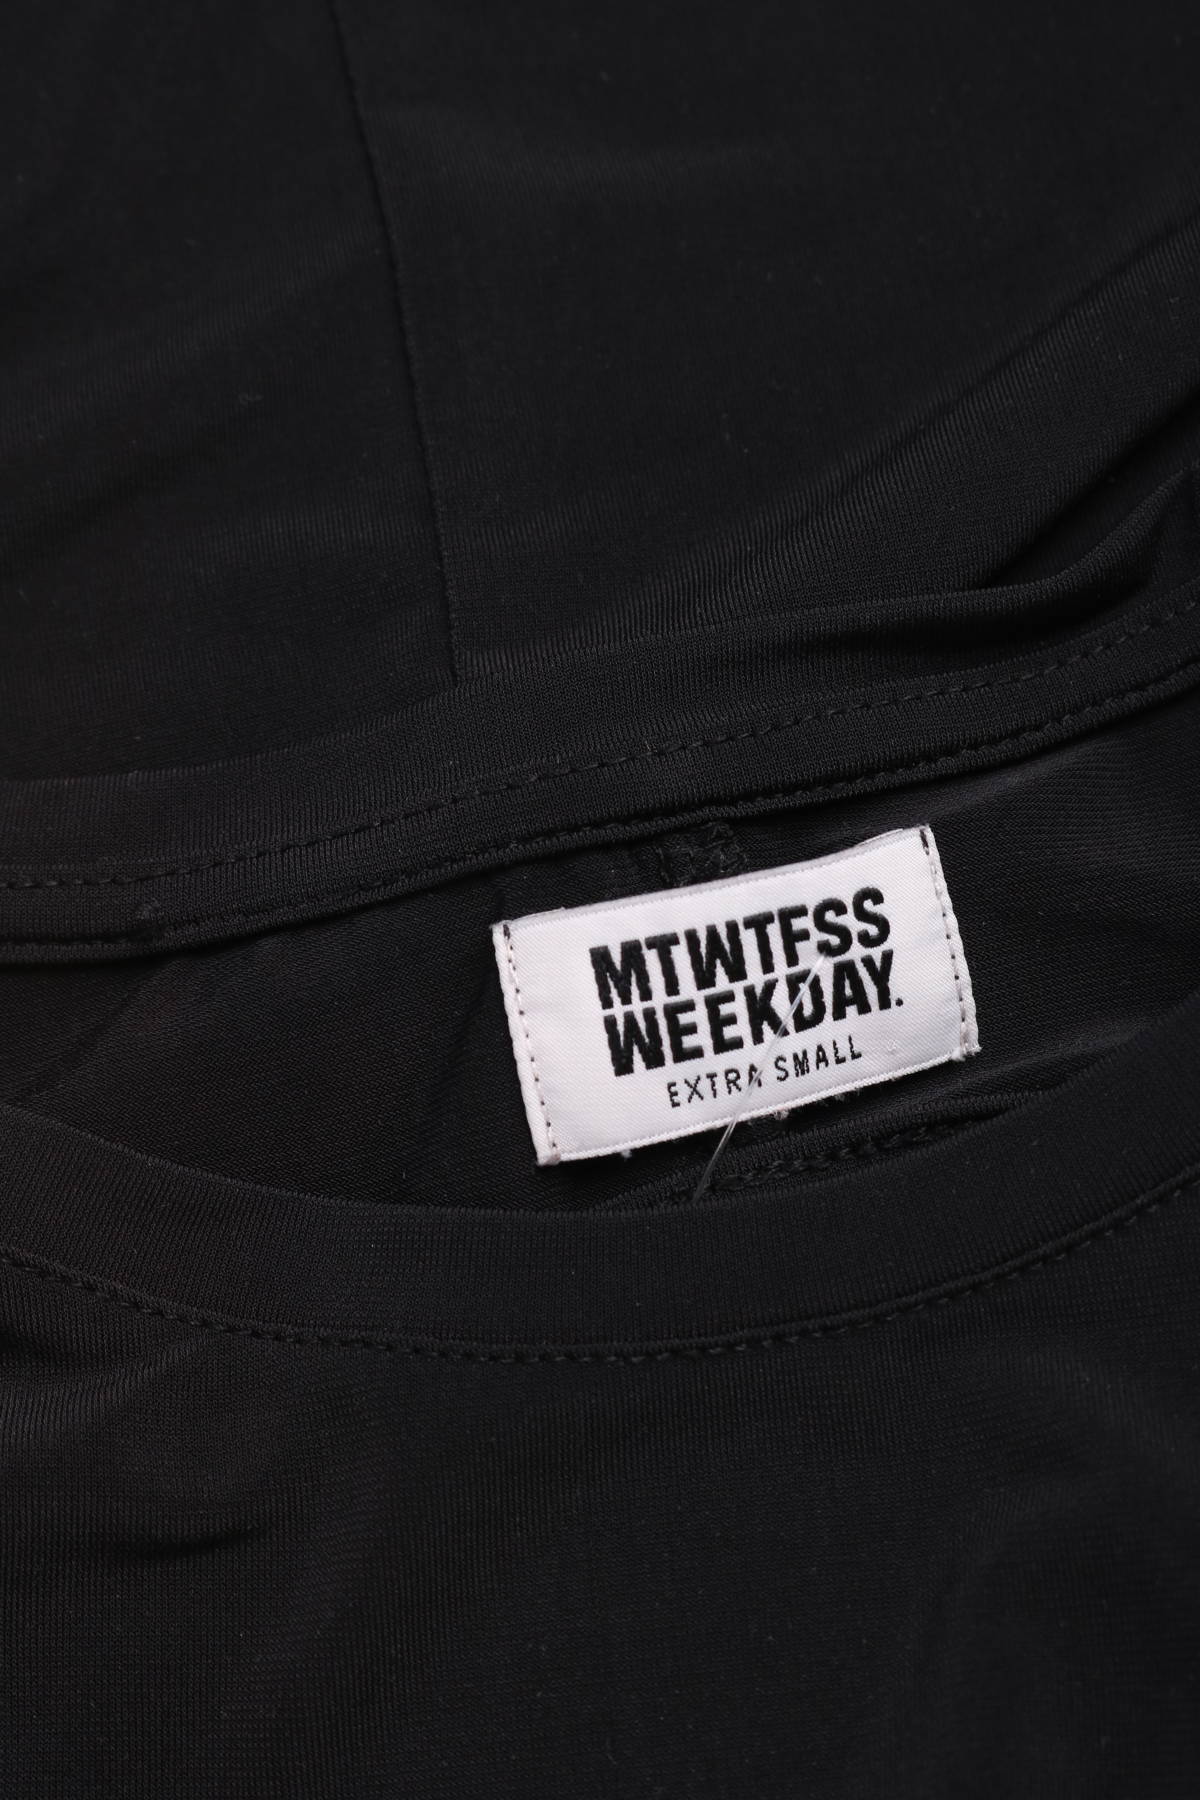 Блуза MTWTFSS WEEKDAY3